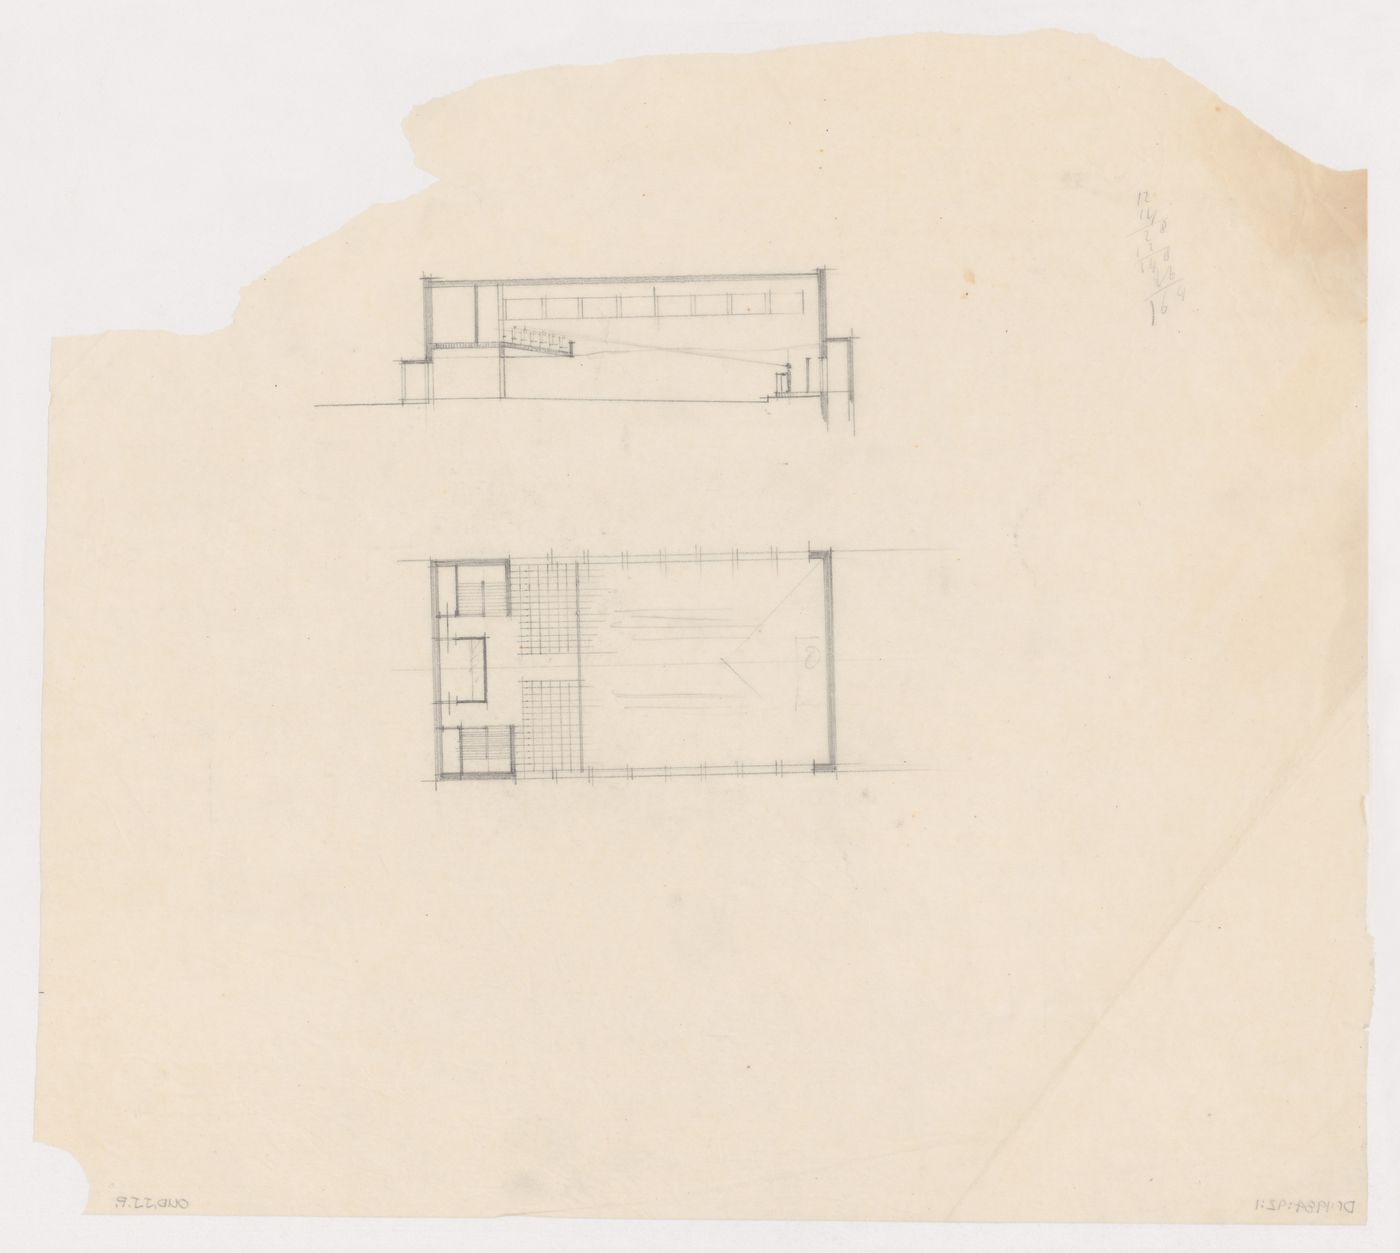 Plan and section for the church meeting hall for Kiefhoek Housing Estate, Rotterdam, Netherlands